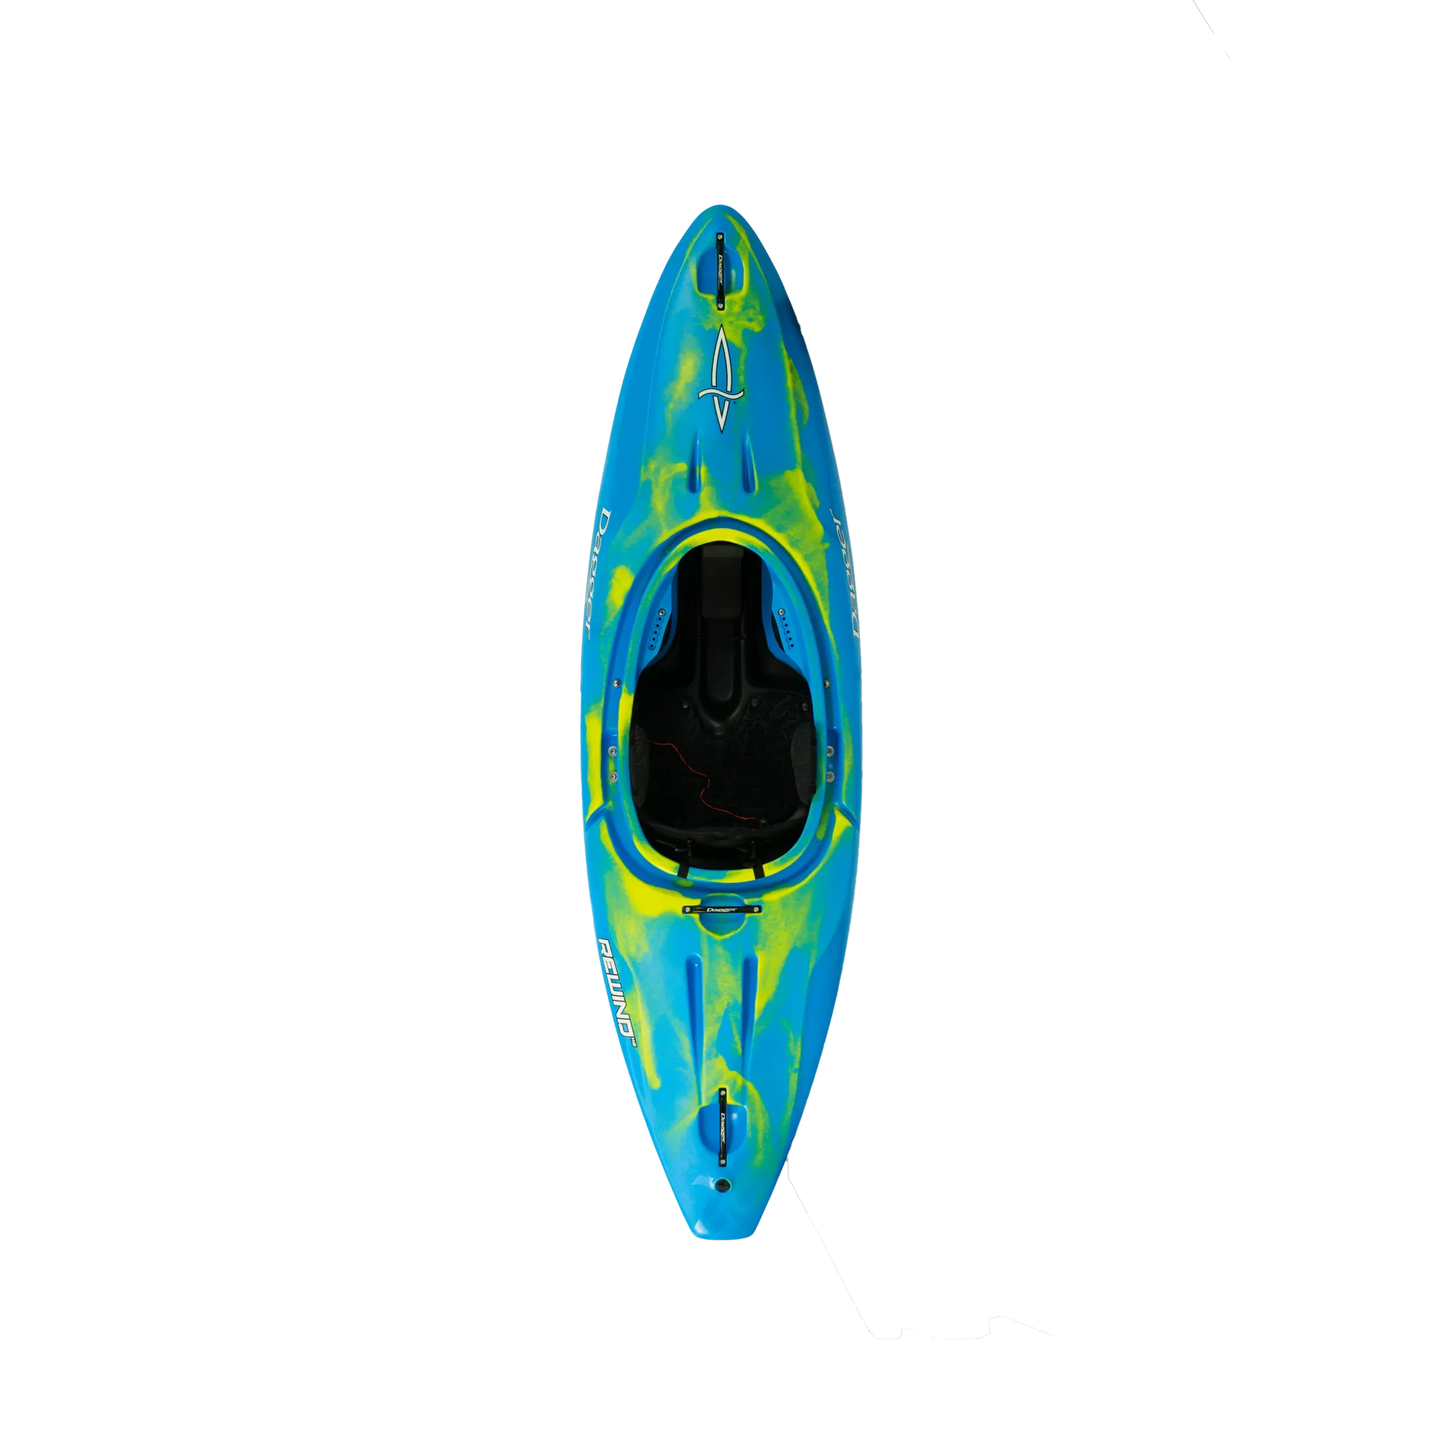 A blue and yellow Rewind XS kayak on a black background. (Brand: Dagger)